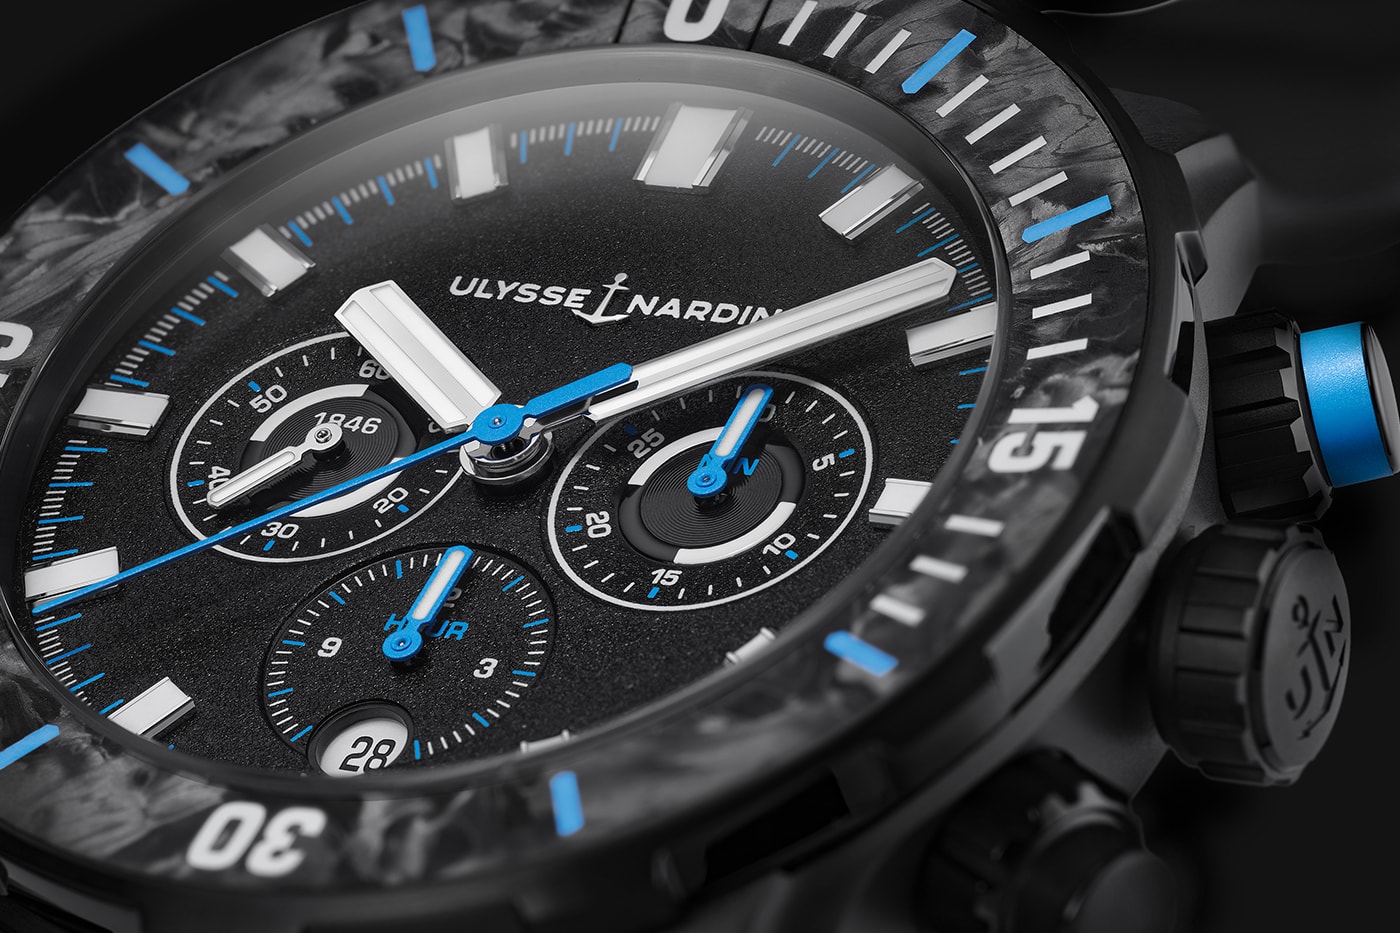 Ulysse Nardin Ocean Race Diver Chronograph Limited-Edition Release Info